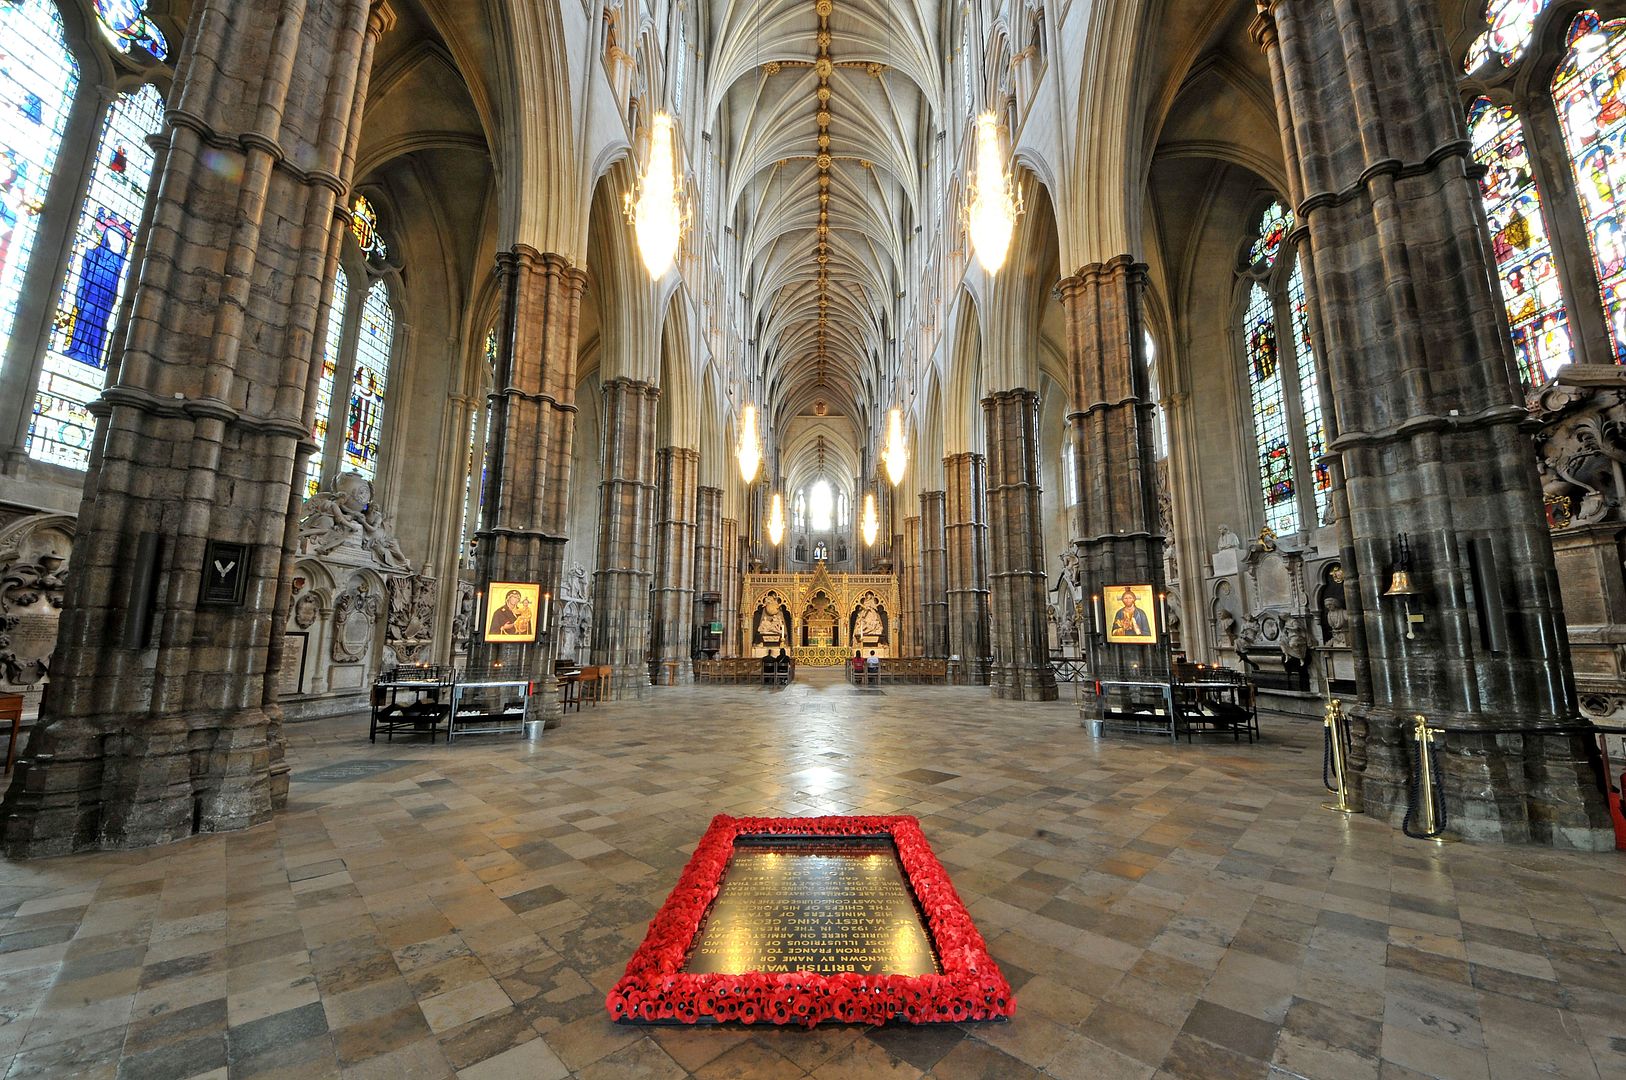 6B.The-Nave-and-Grave-of-the-Unknown-Warrior_zpscxfwblvk.jpg